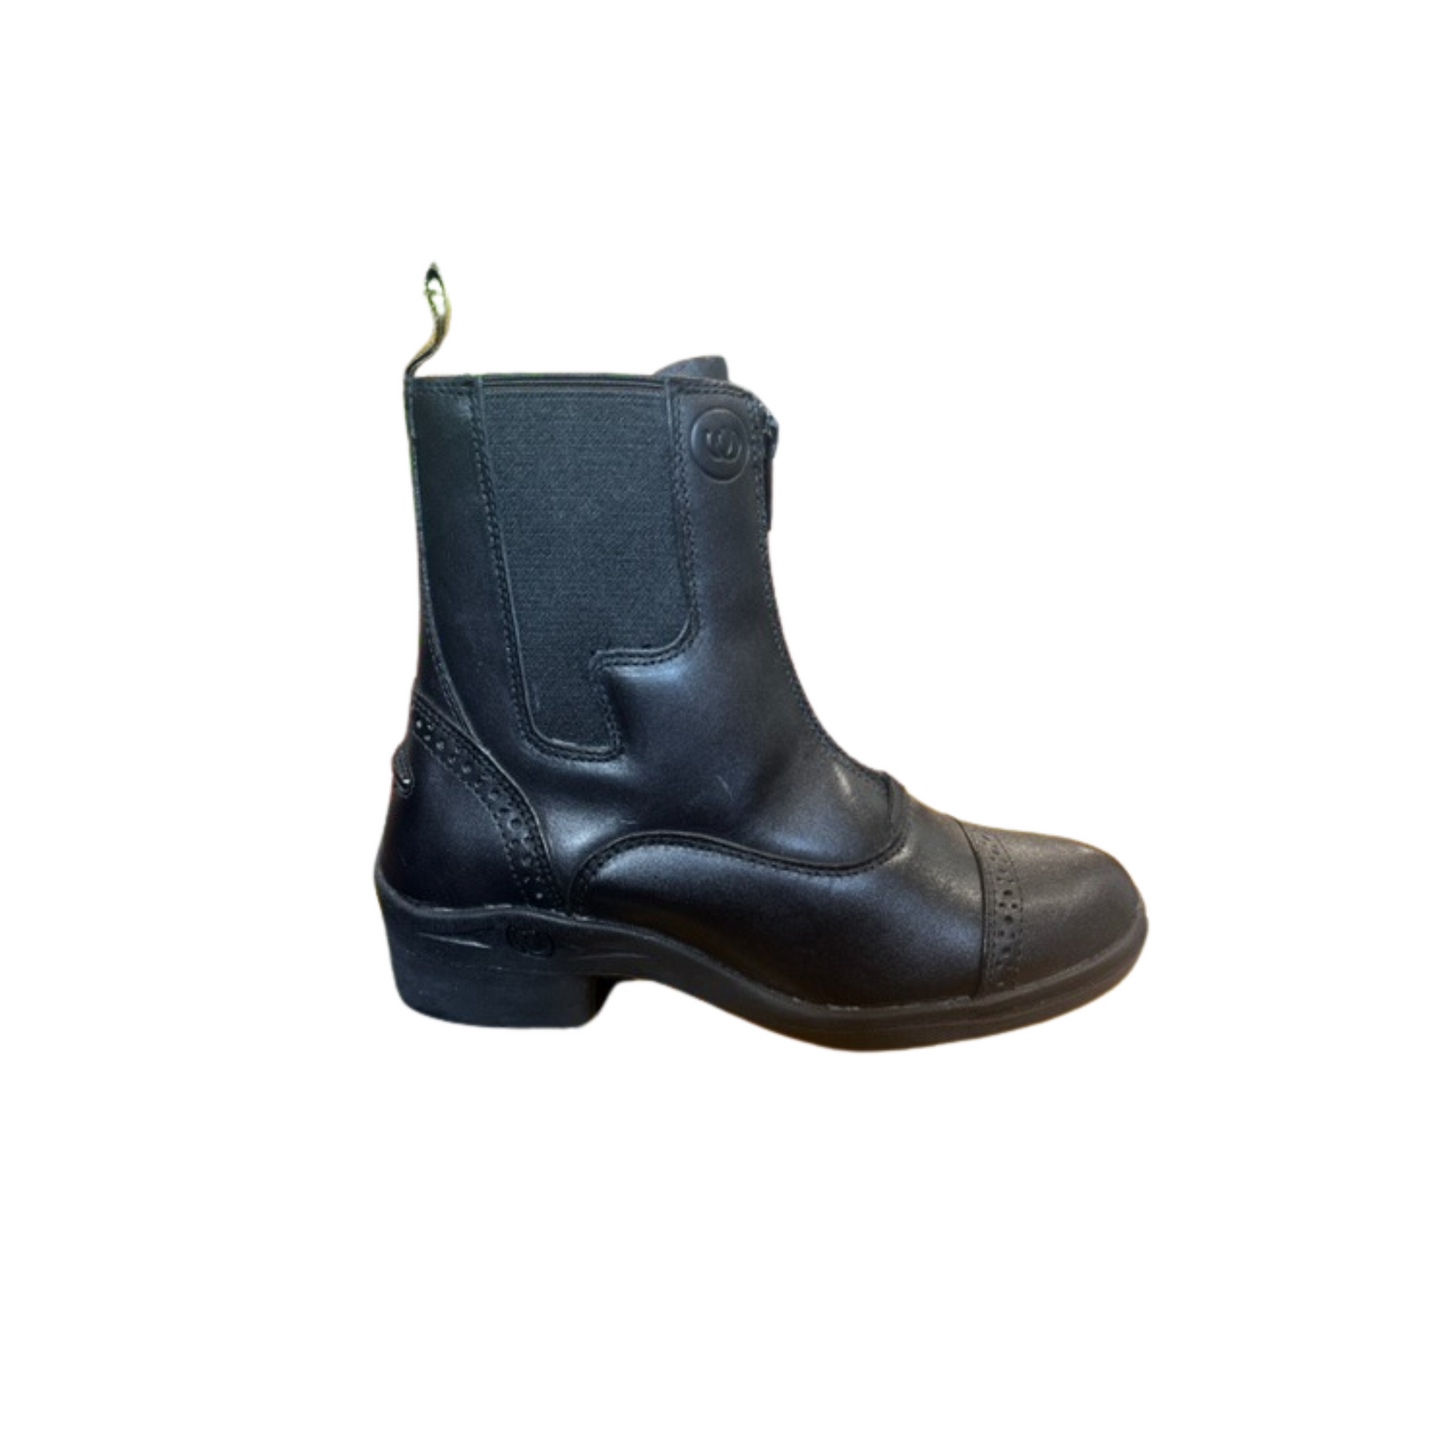 Children's Zip Paddock Boots || SIZES 2 & 12 ONLY